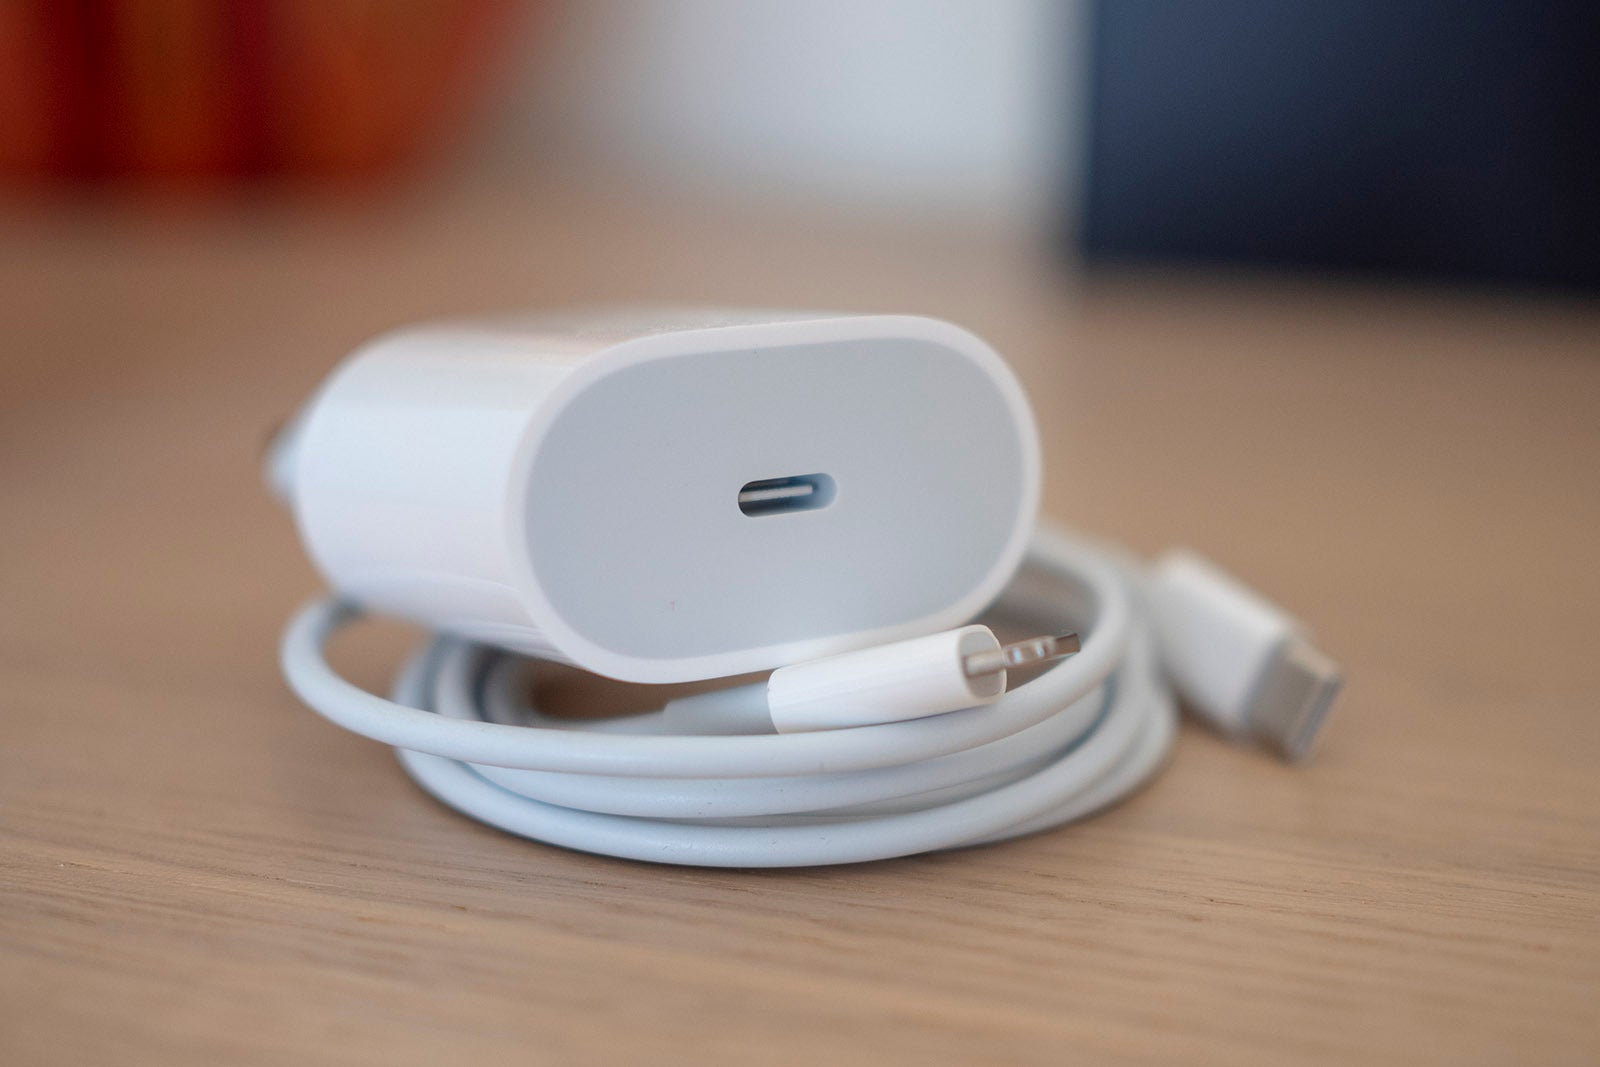 The new 18-watt charger that comes in the box features a USB-C connection and is bigger than before - iPhone 11 Pro and Pro Max fast charging tested: it makes a HUGE difference!